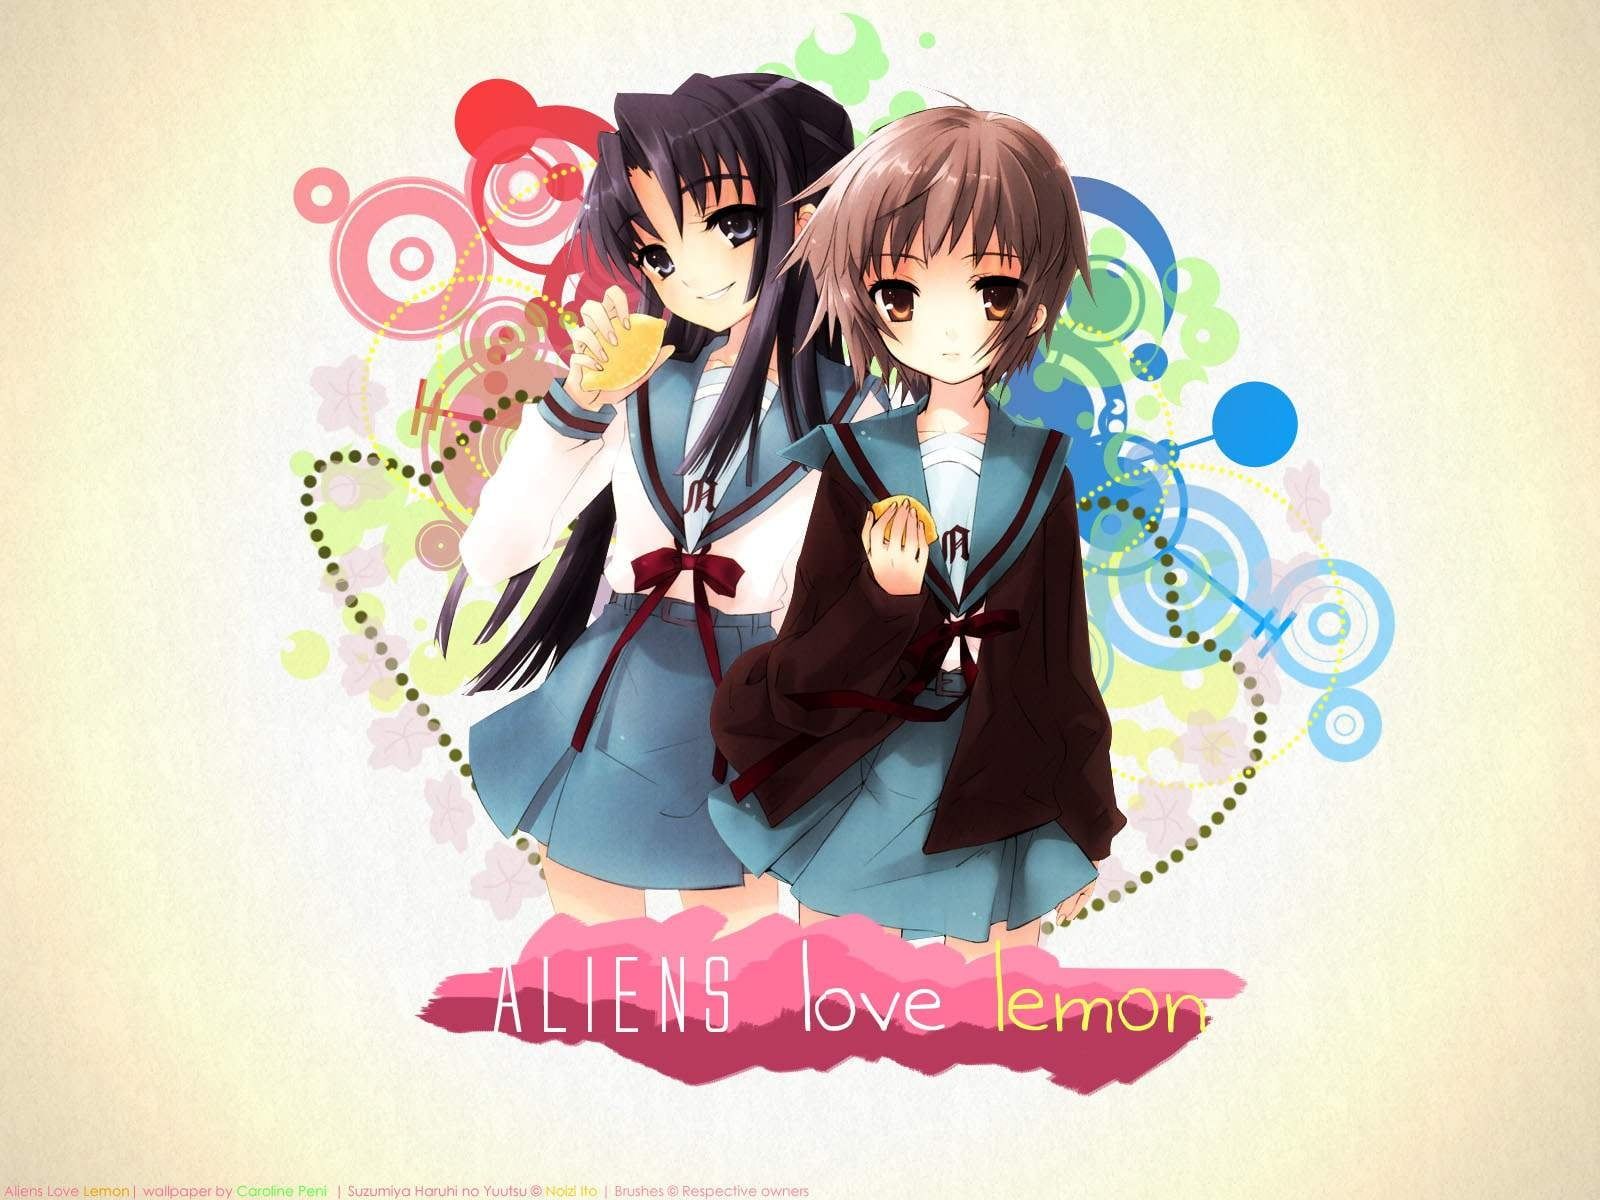 Two girls with brown and black hairs anime illustration HD